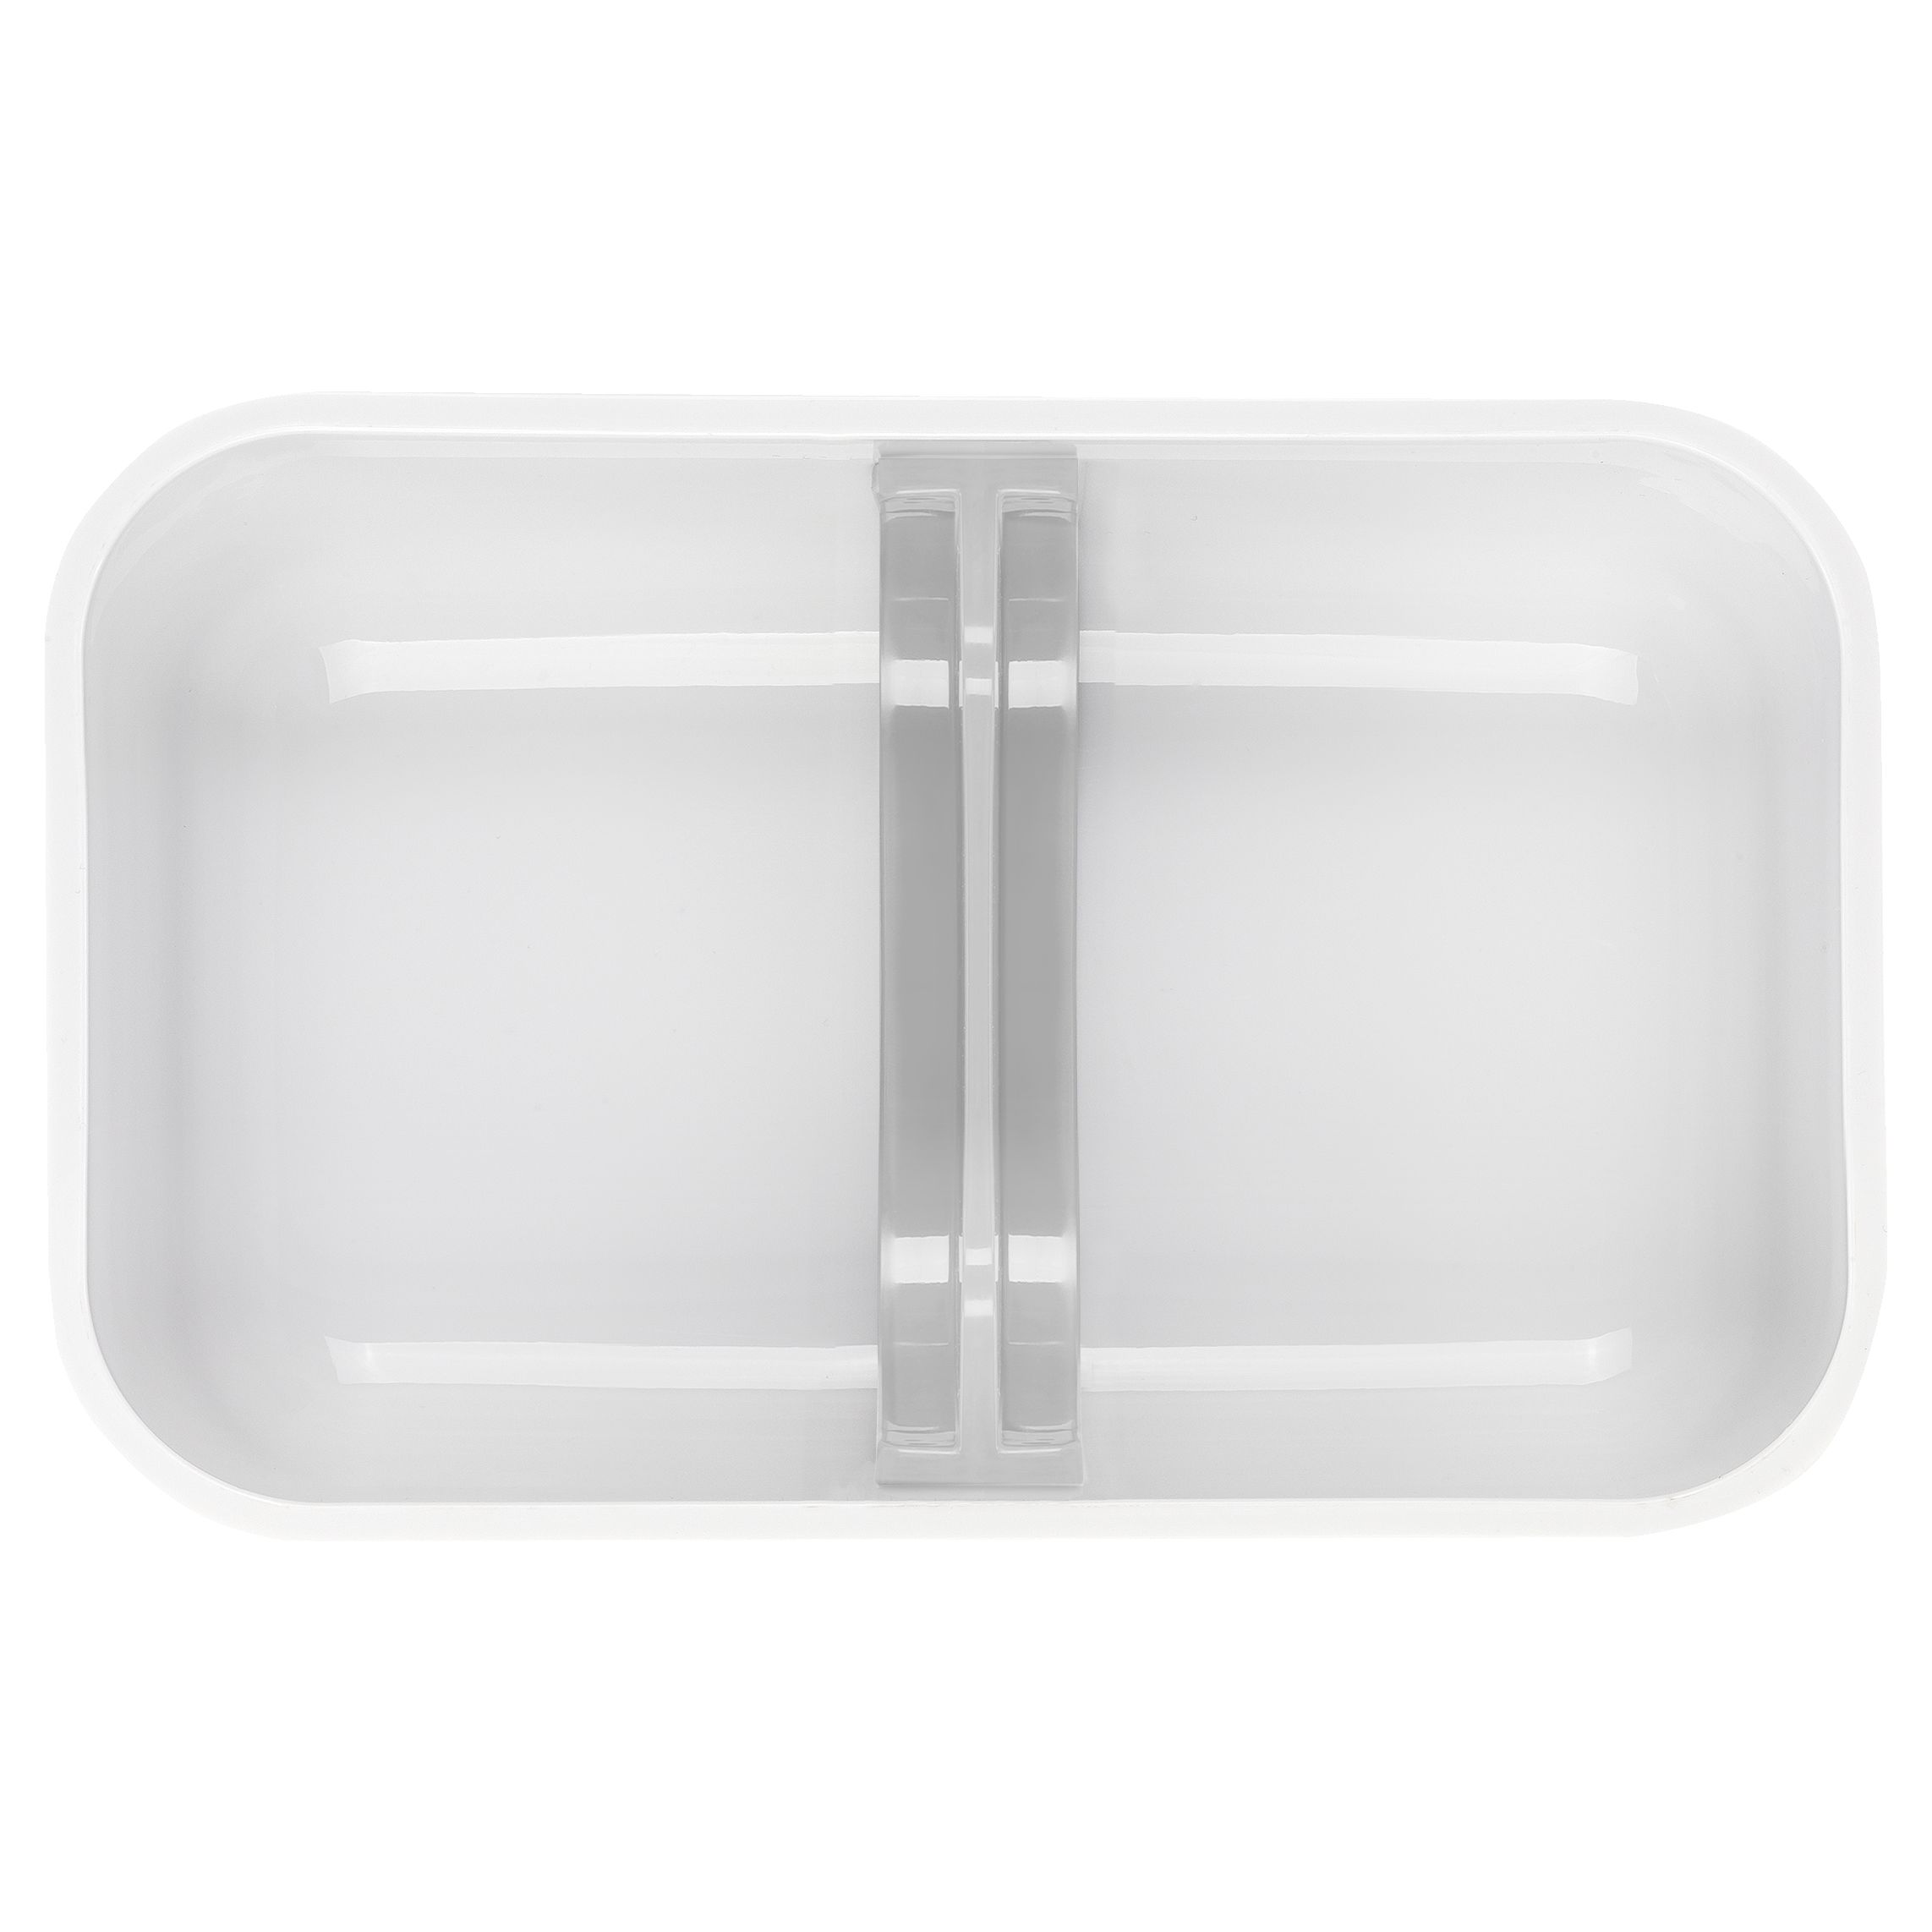 Zwilling Fresh & Save Plastic Lunch Box, Airtight Food Storage Container,  Meal Prep Container, Bpa-free, Grey, Semitransparent - Medium : Target